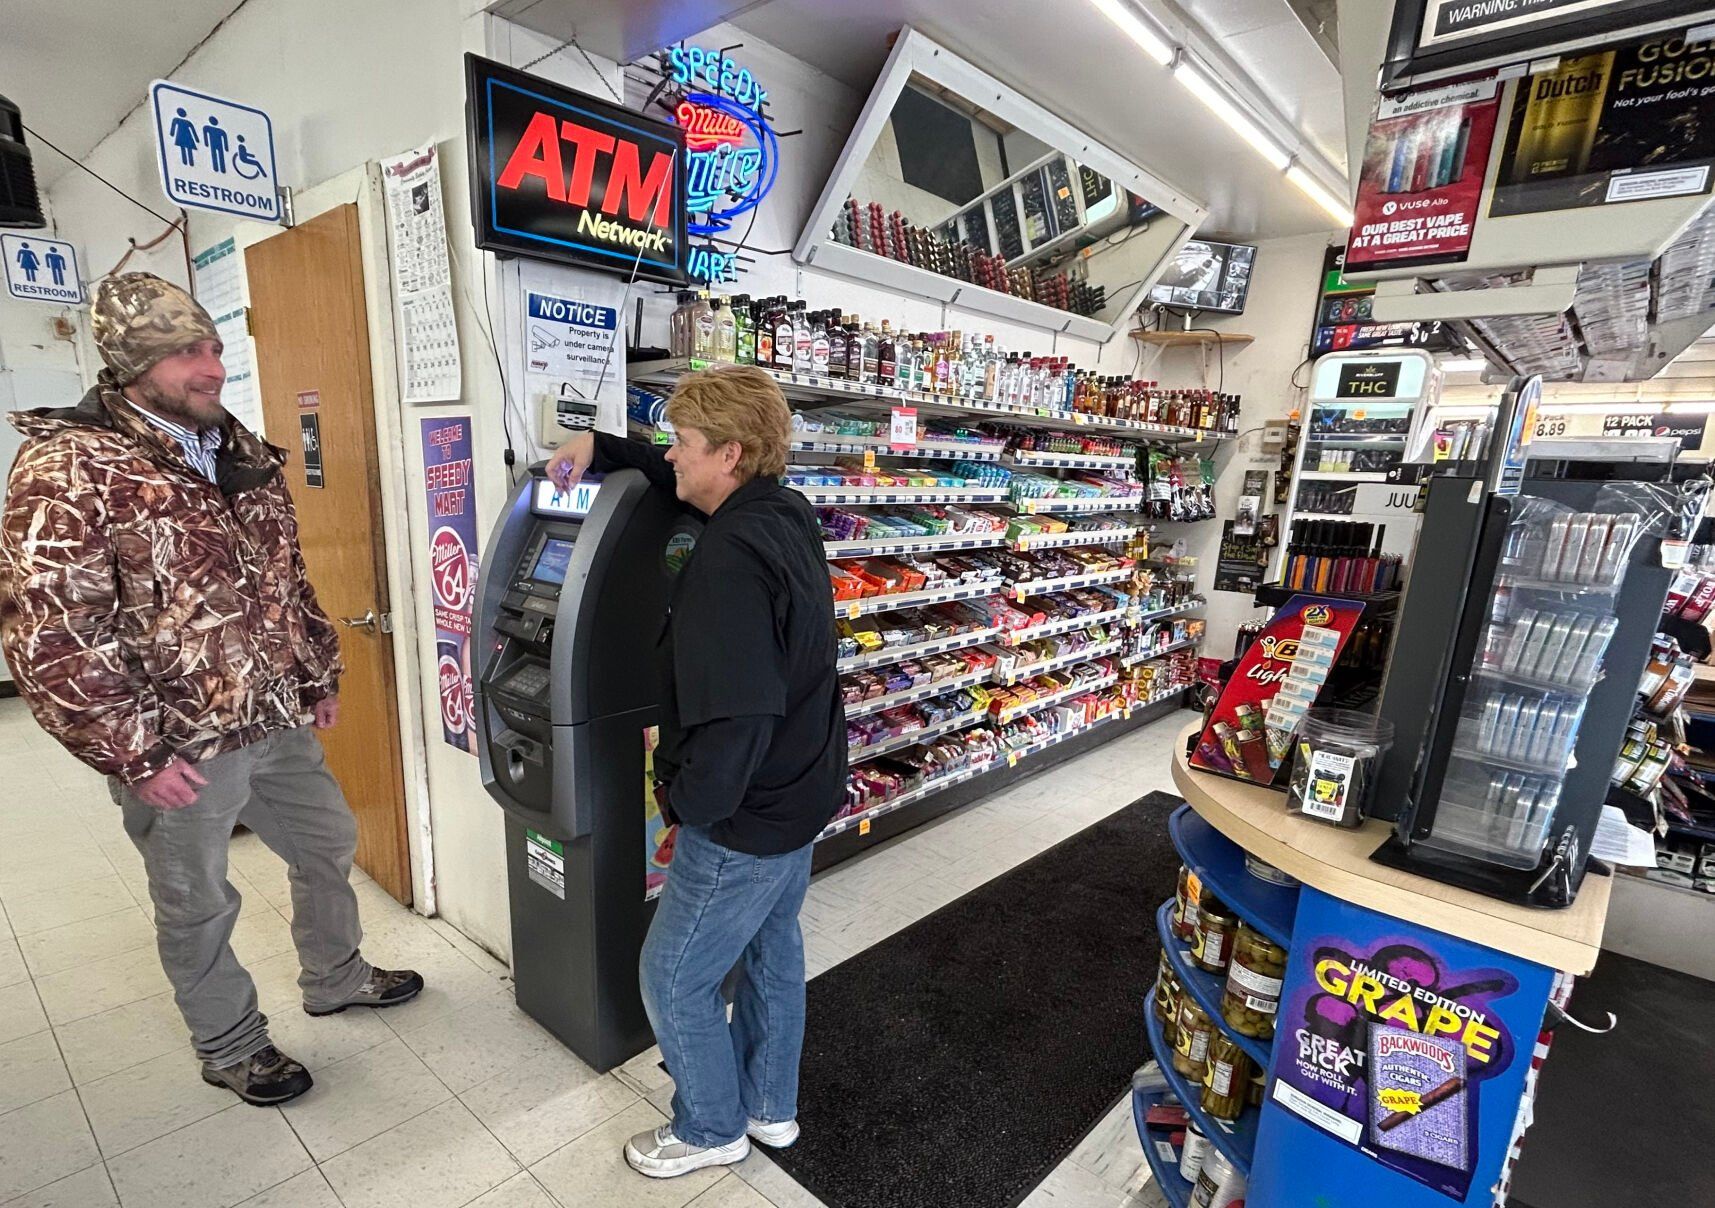 Dustin Crane, of Wisconsin Distributors, speaks with Speedy Mart owner Angie Faith recently in the Fennimore, Wis., convenience store. Faith purchased the store from her parents in 2007, and the store is in its 52nd year of business.    PHOTO CREDIT: Erik Hogstrom
Telegraph Herald